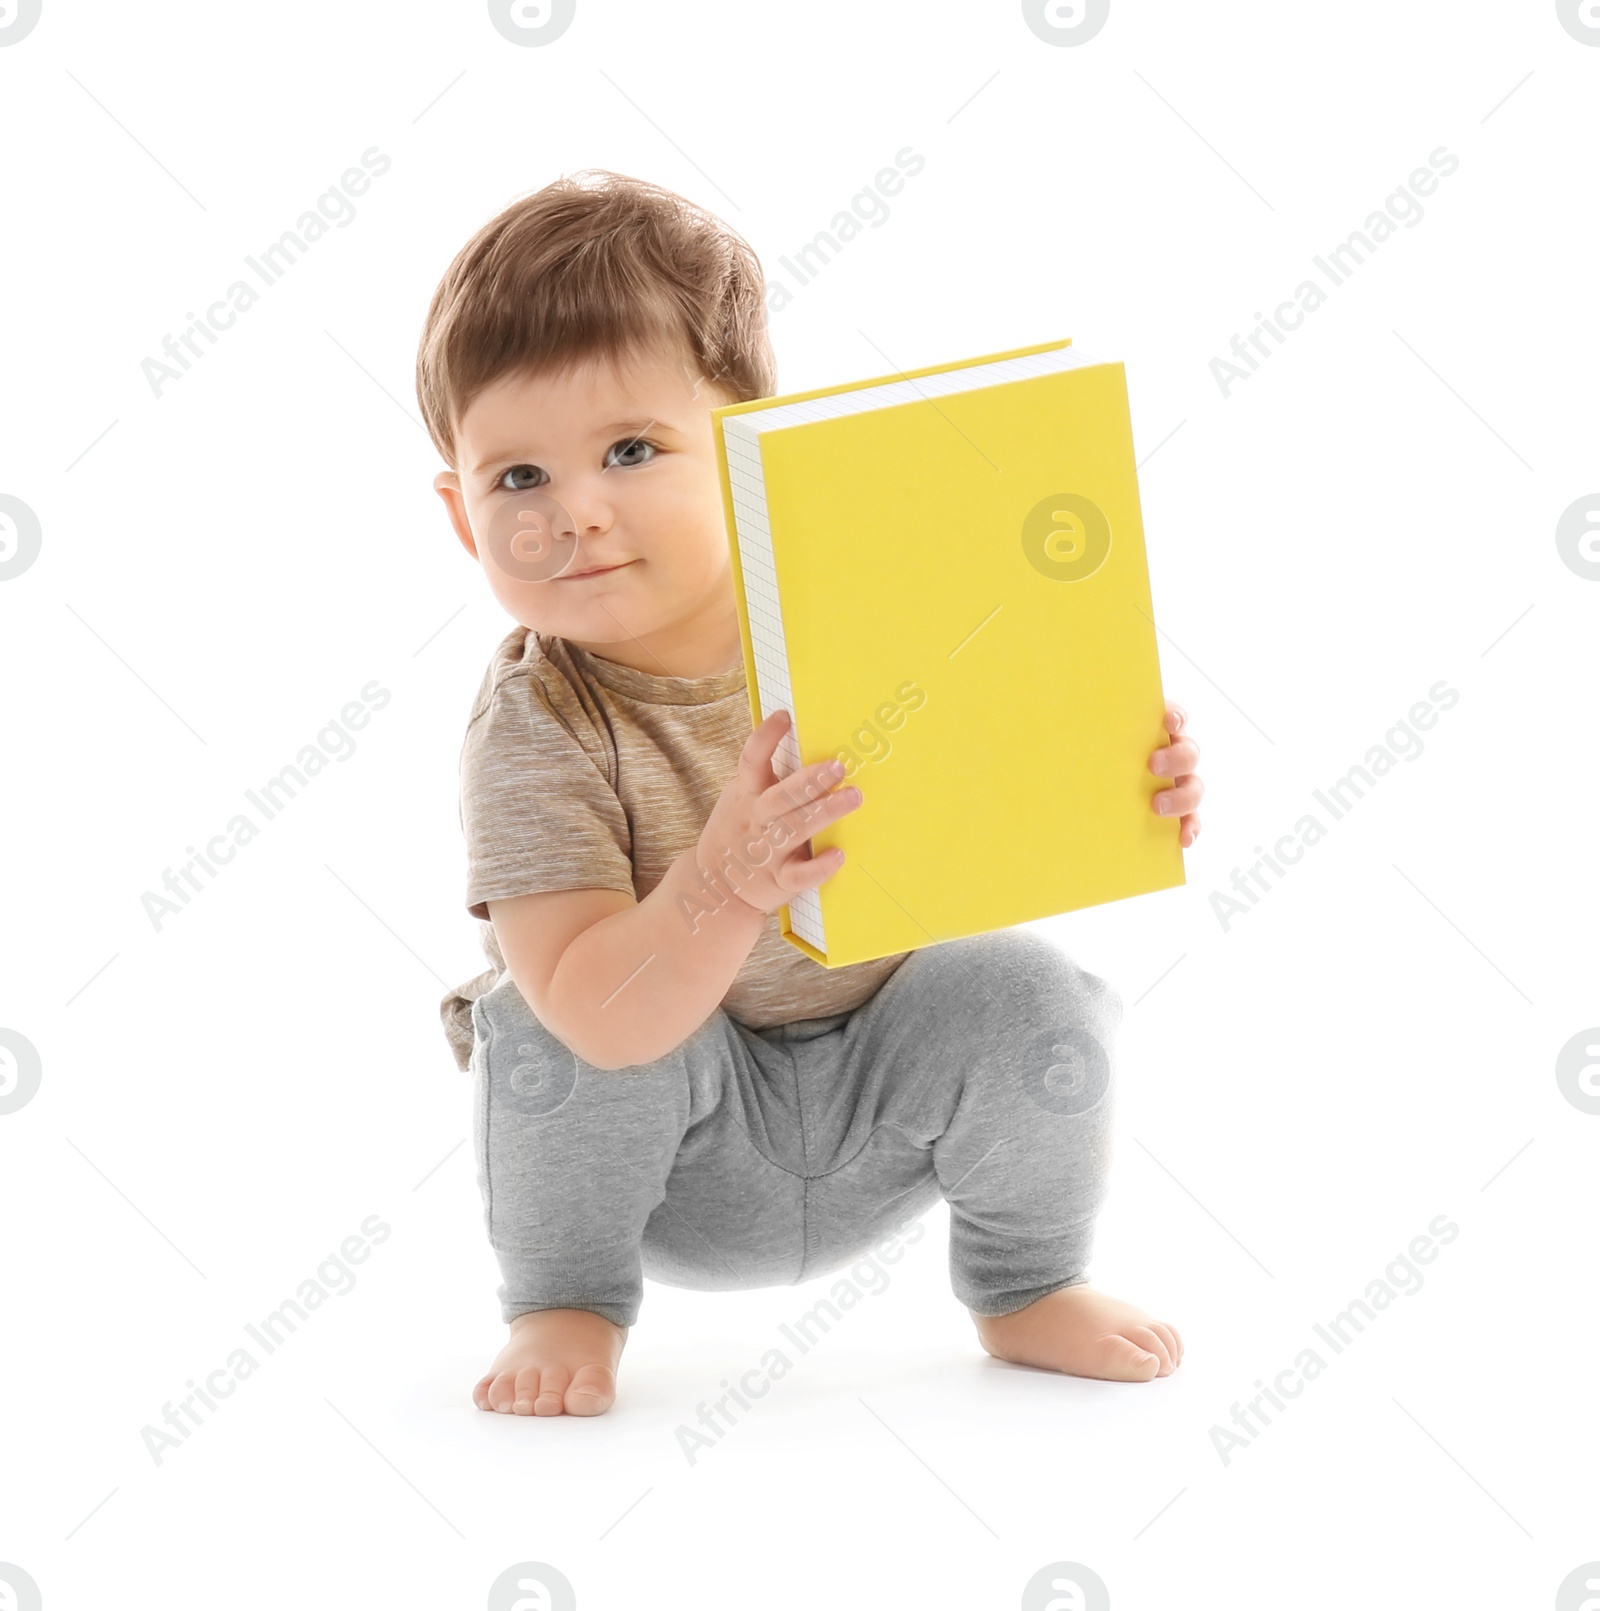 Photo of Cute baby playing with box on white background